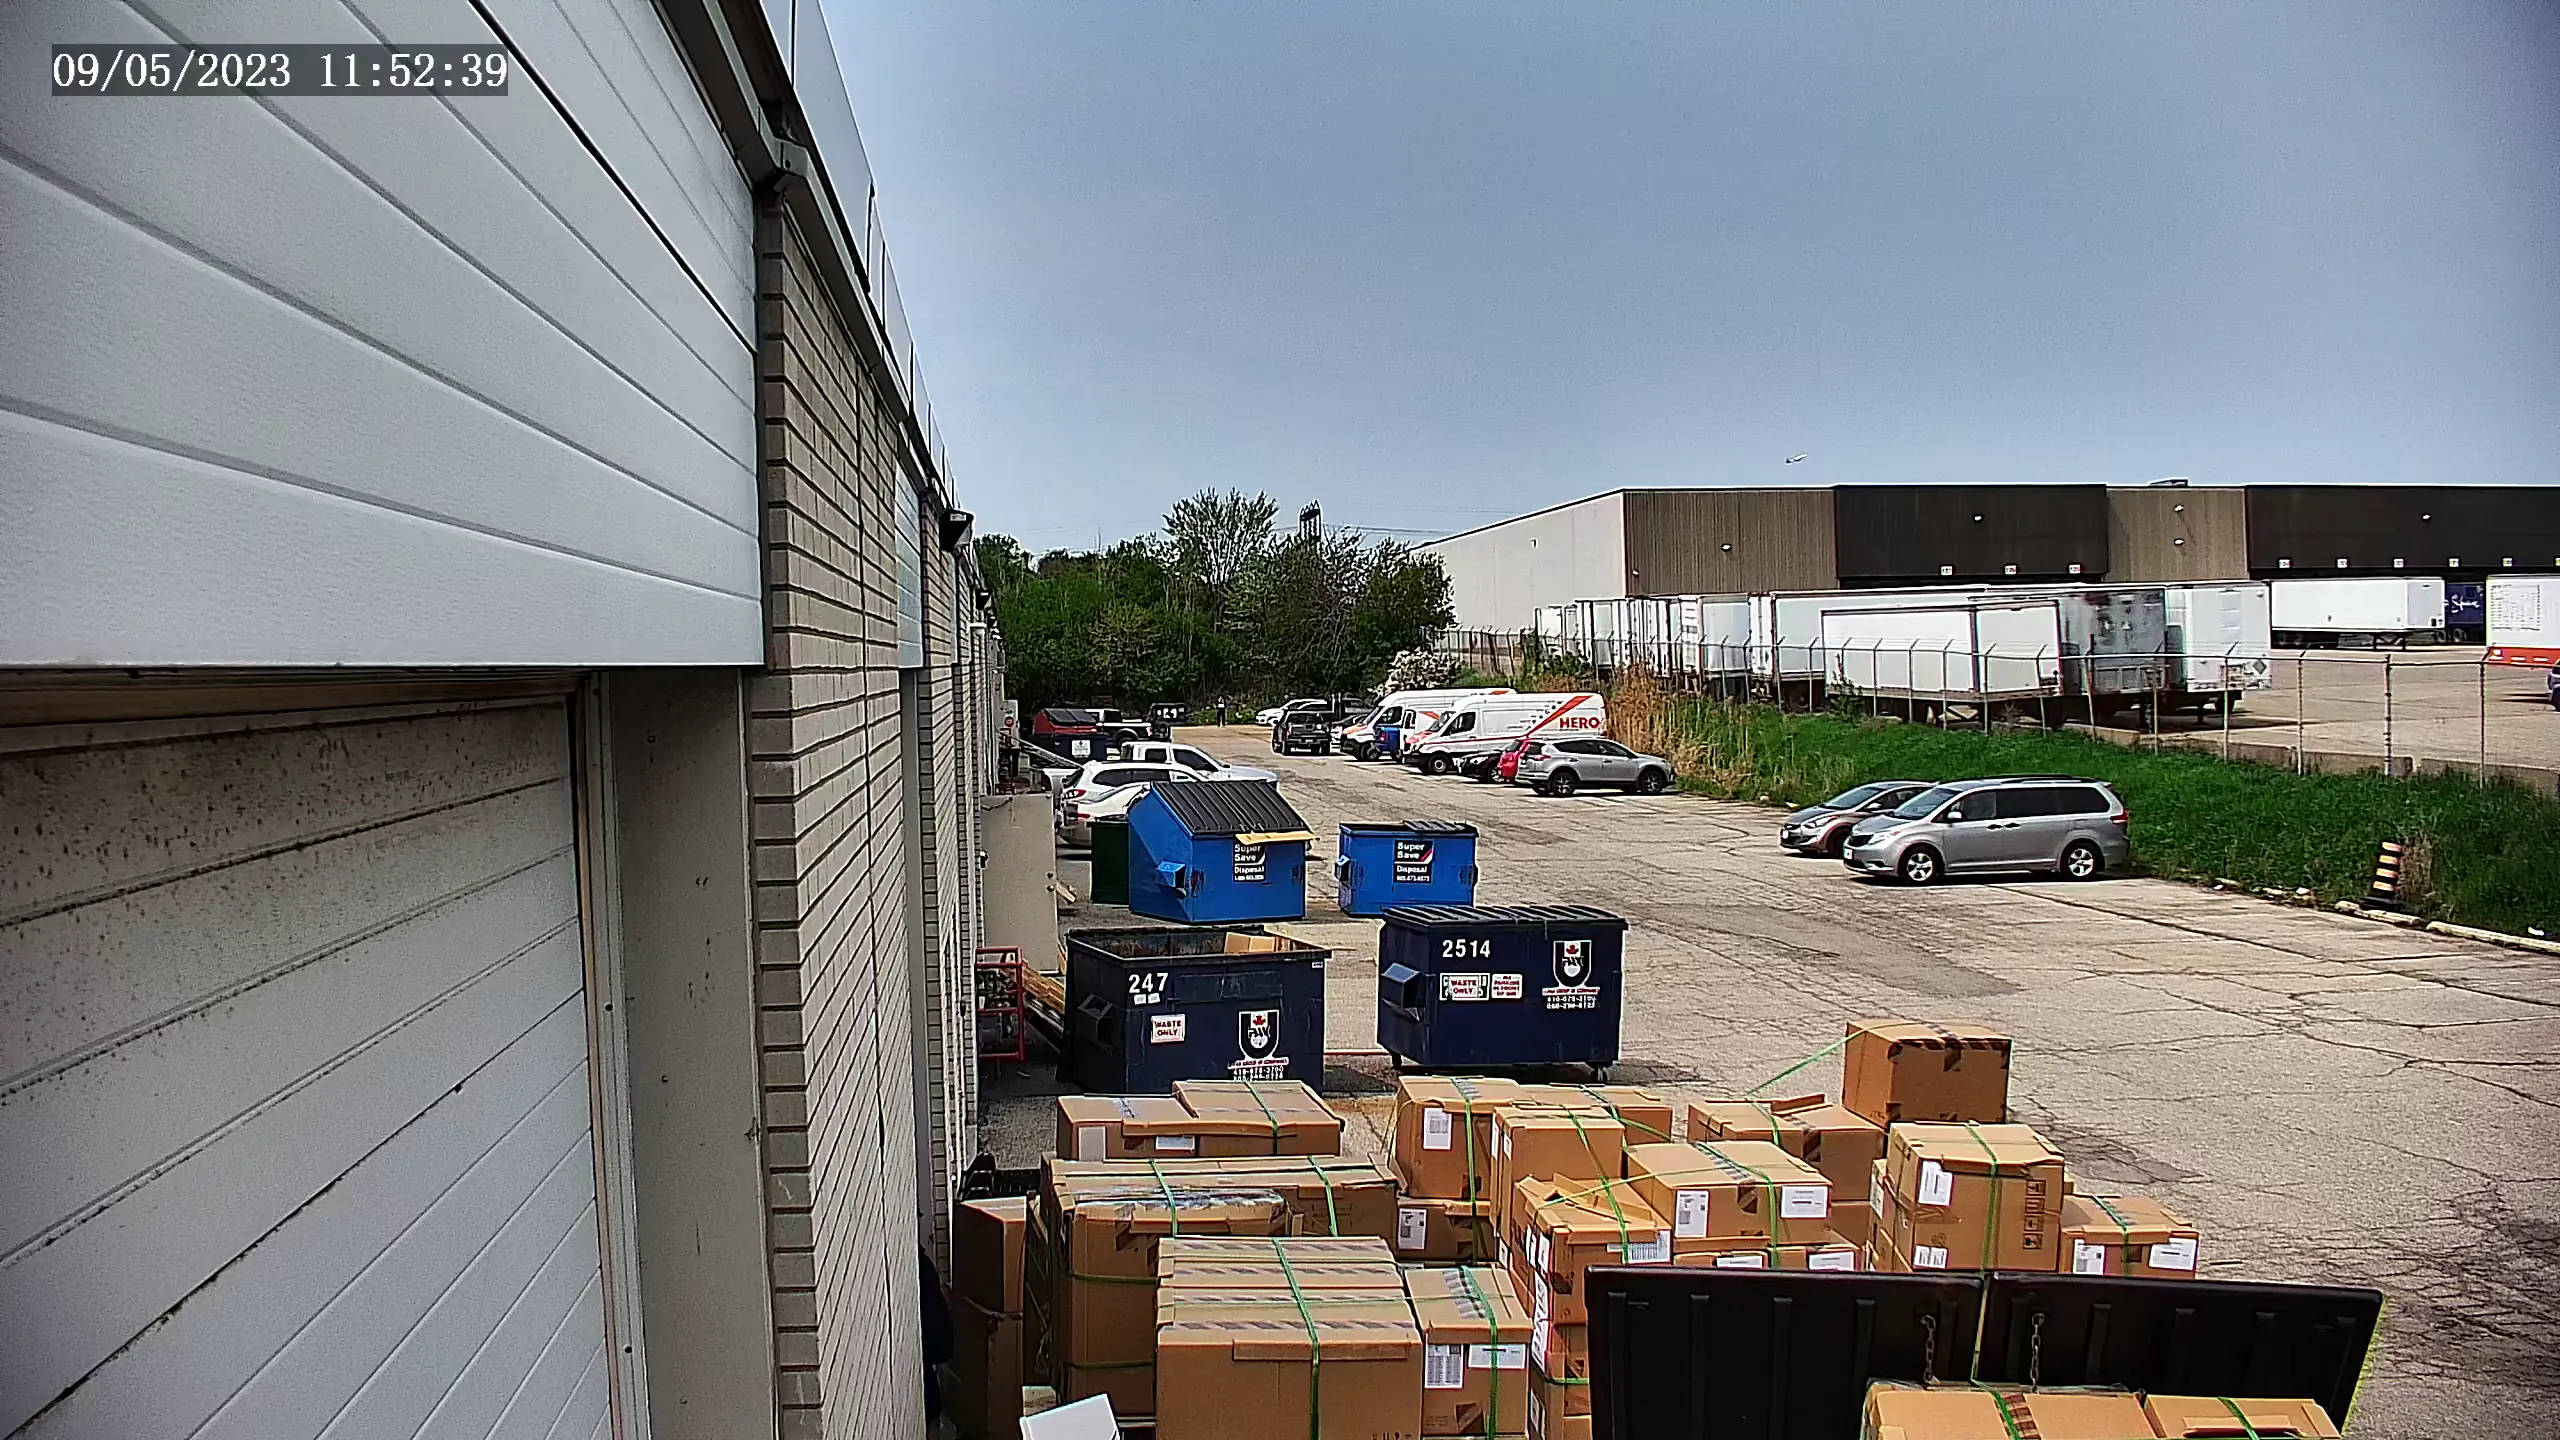 Security camera footage of the back of a commercial warehouse building